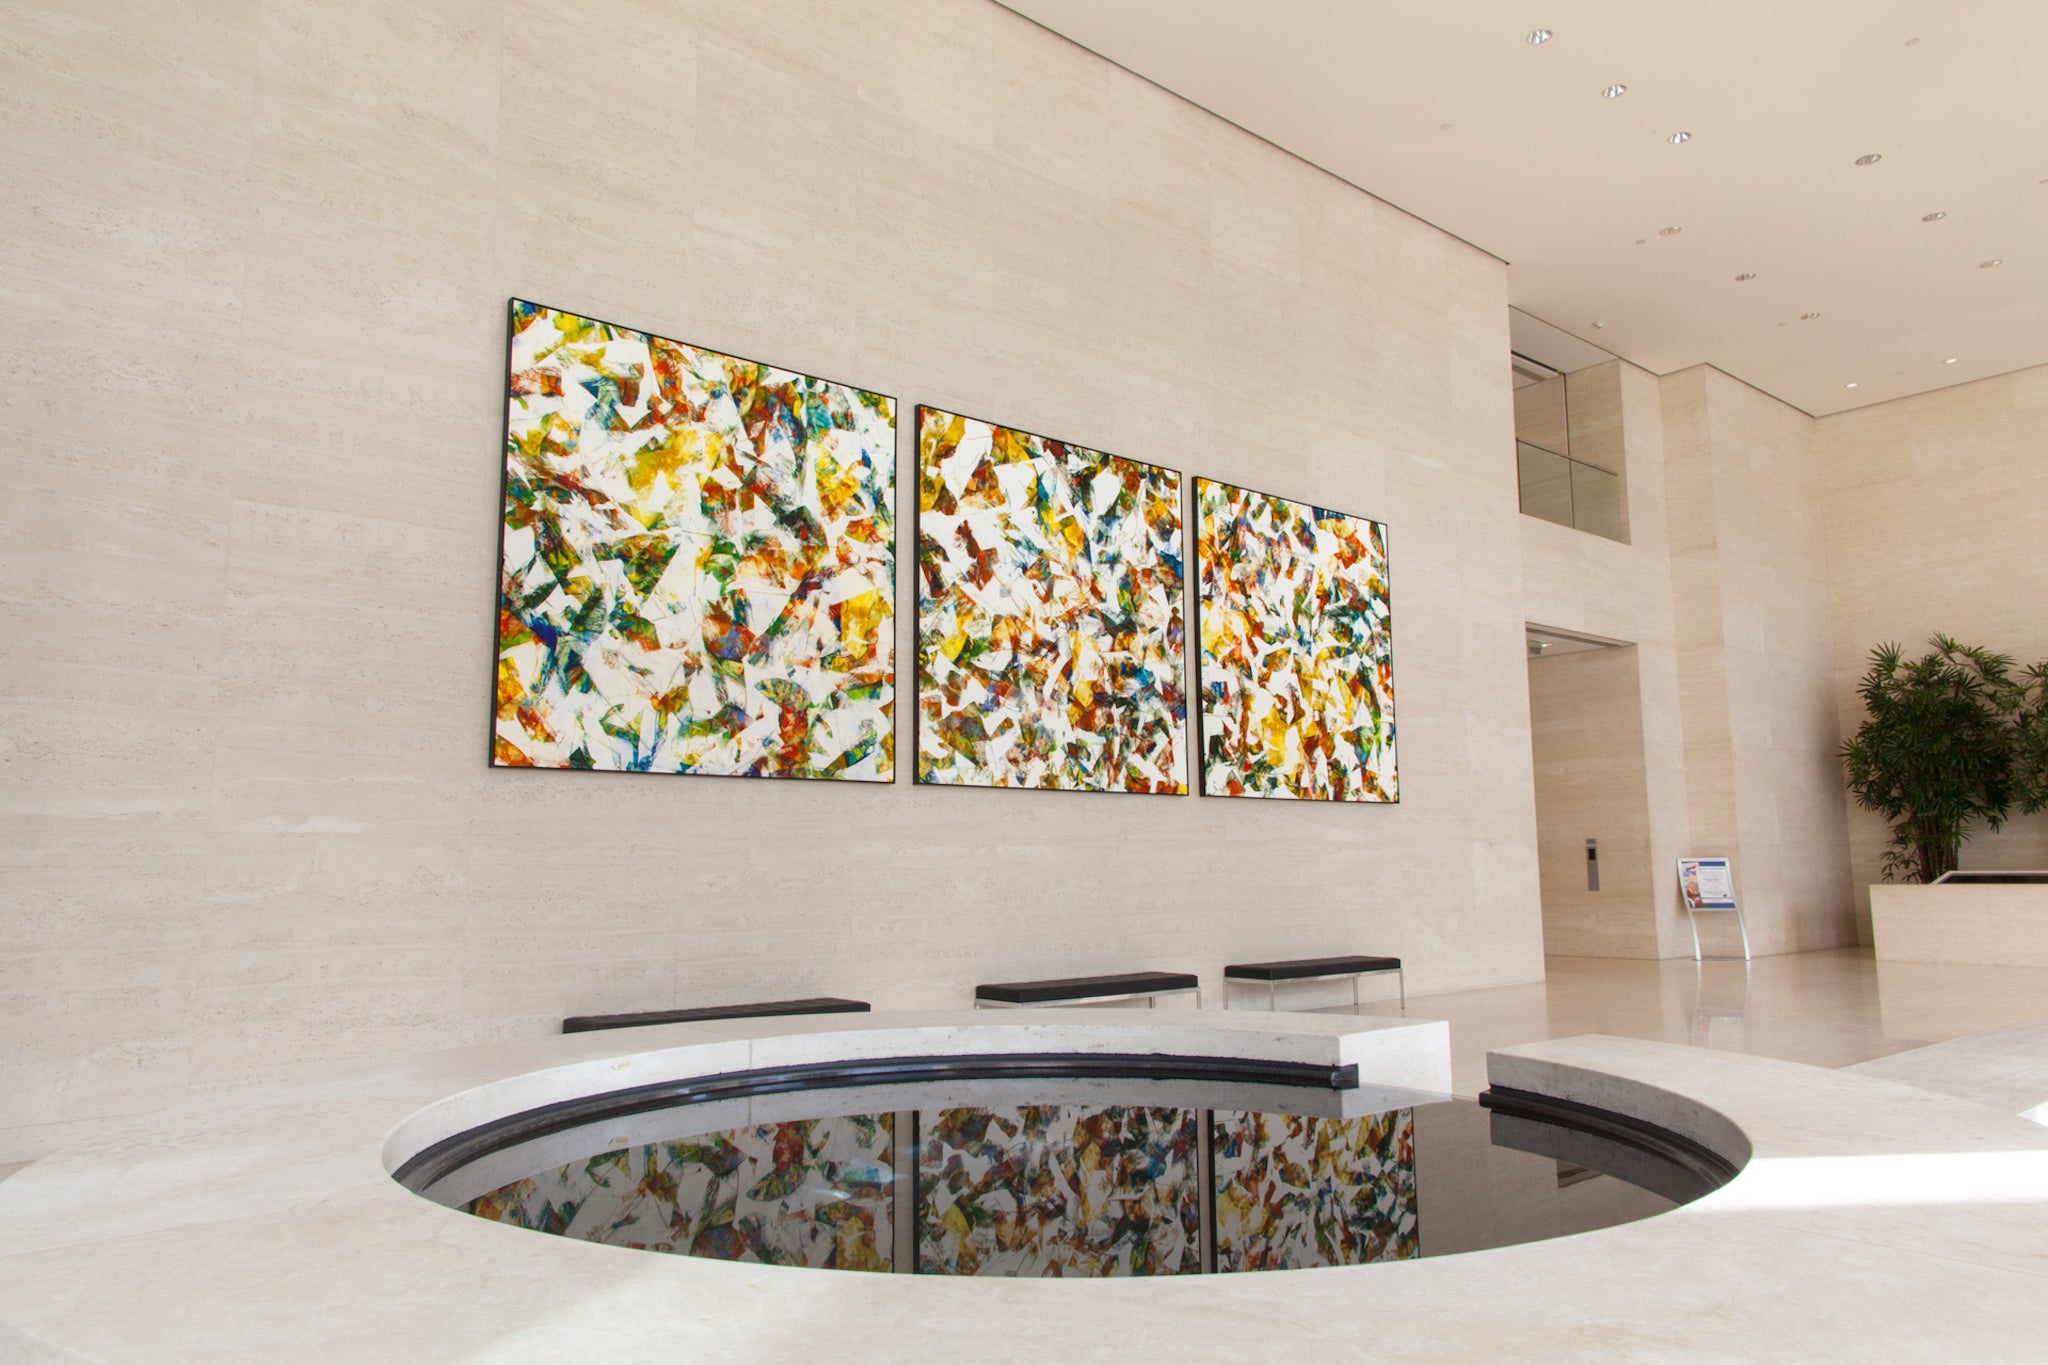 Custom large-format canvas art created by WRAPPED Studio for MacArthur Court office lobby, inspired by Newport's natural beauty, accentuating the lobby's modern elegance.